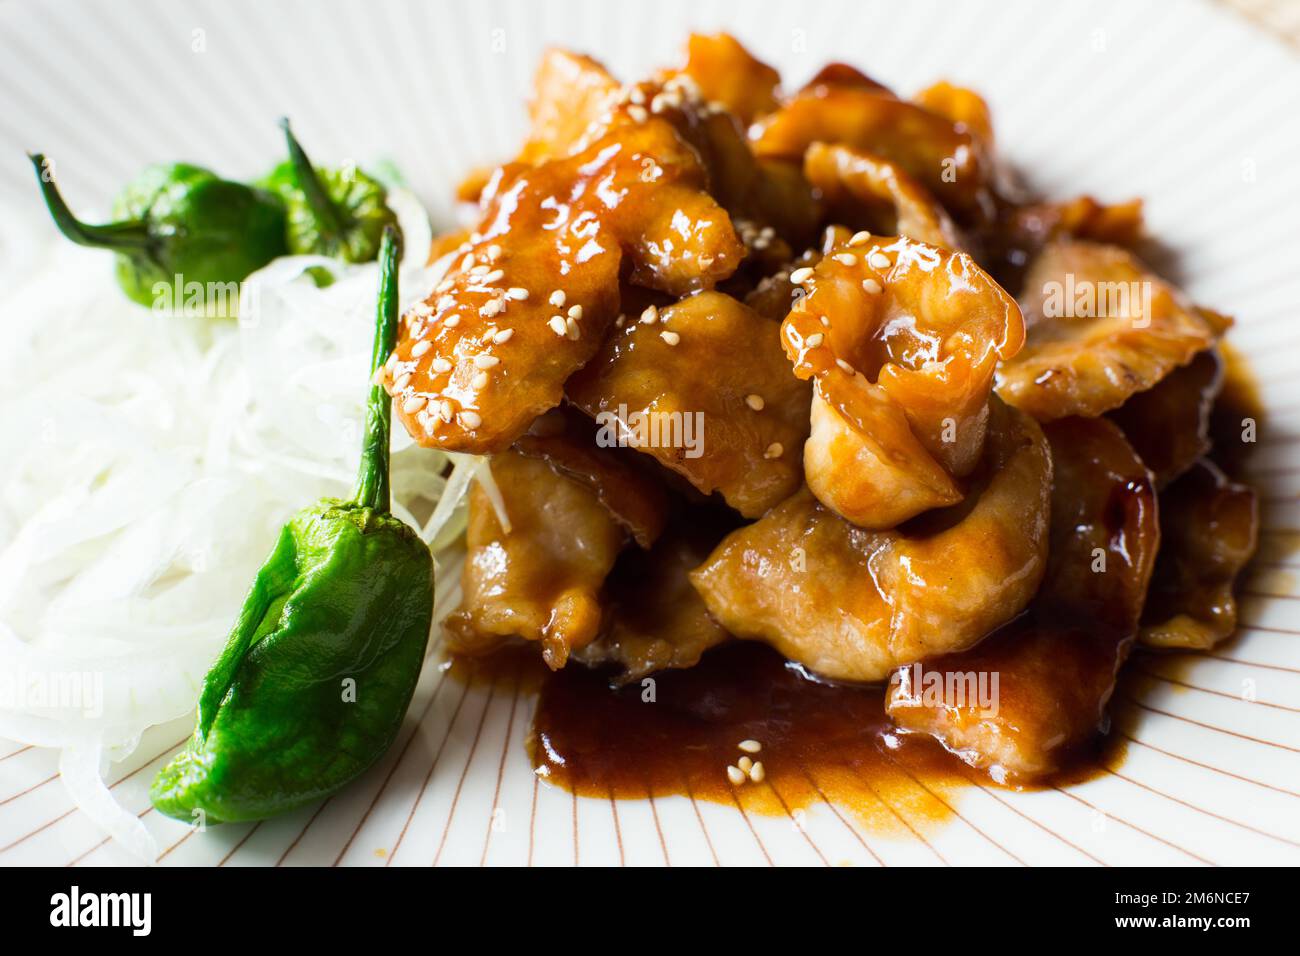 Chicken cooked in Japanese style with teriyaki sauce. Stock Photo